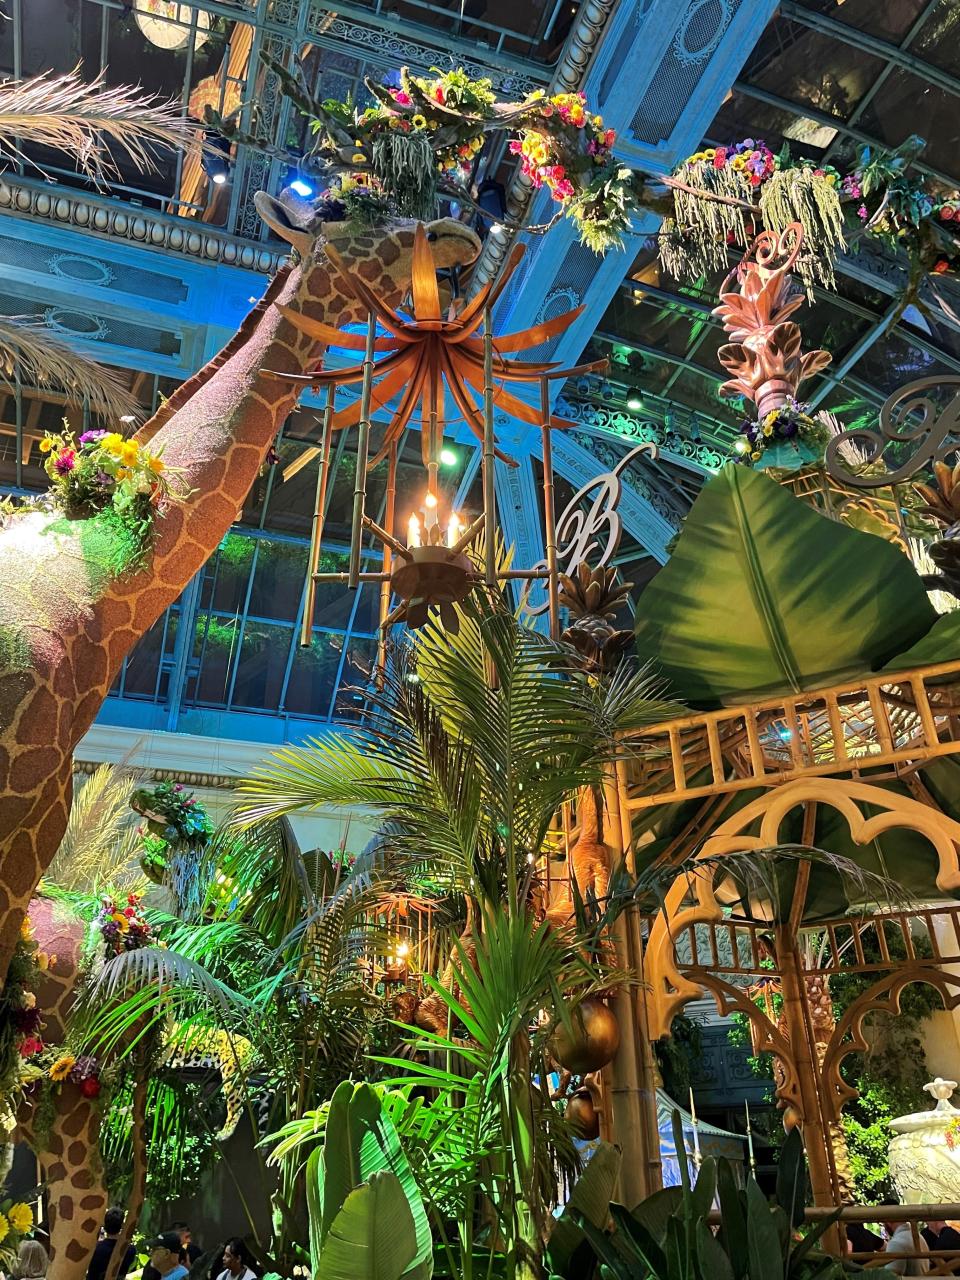 The Bellagio Conservatory & Botanical Gardens inside the Bellagio Resort & Casino on the Las Vegas Strip is open 24 hours with free admission. Its over-the-top displays change with the seasons.